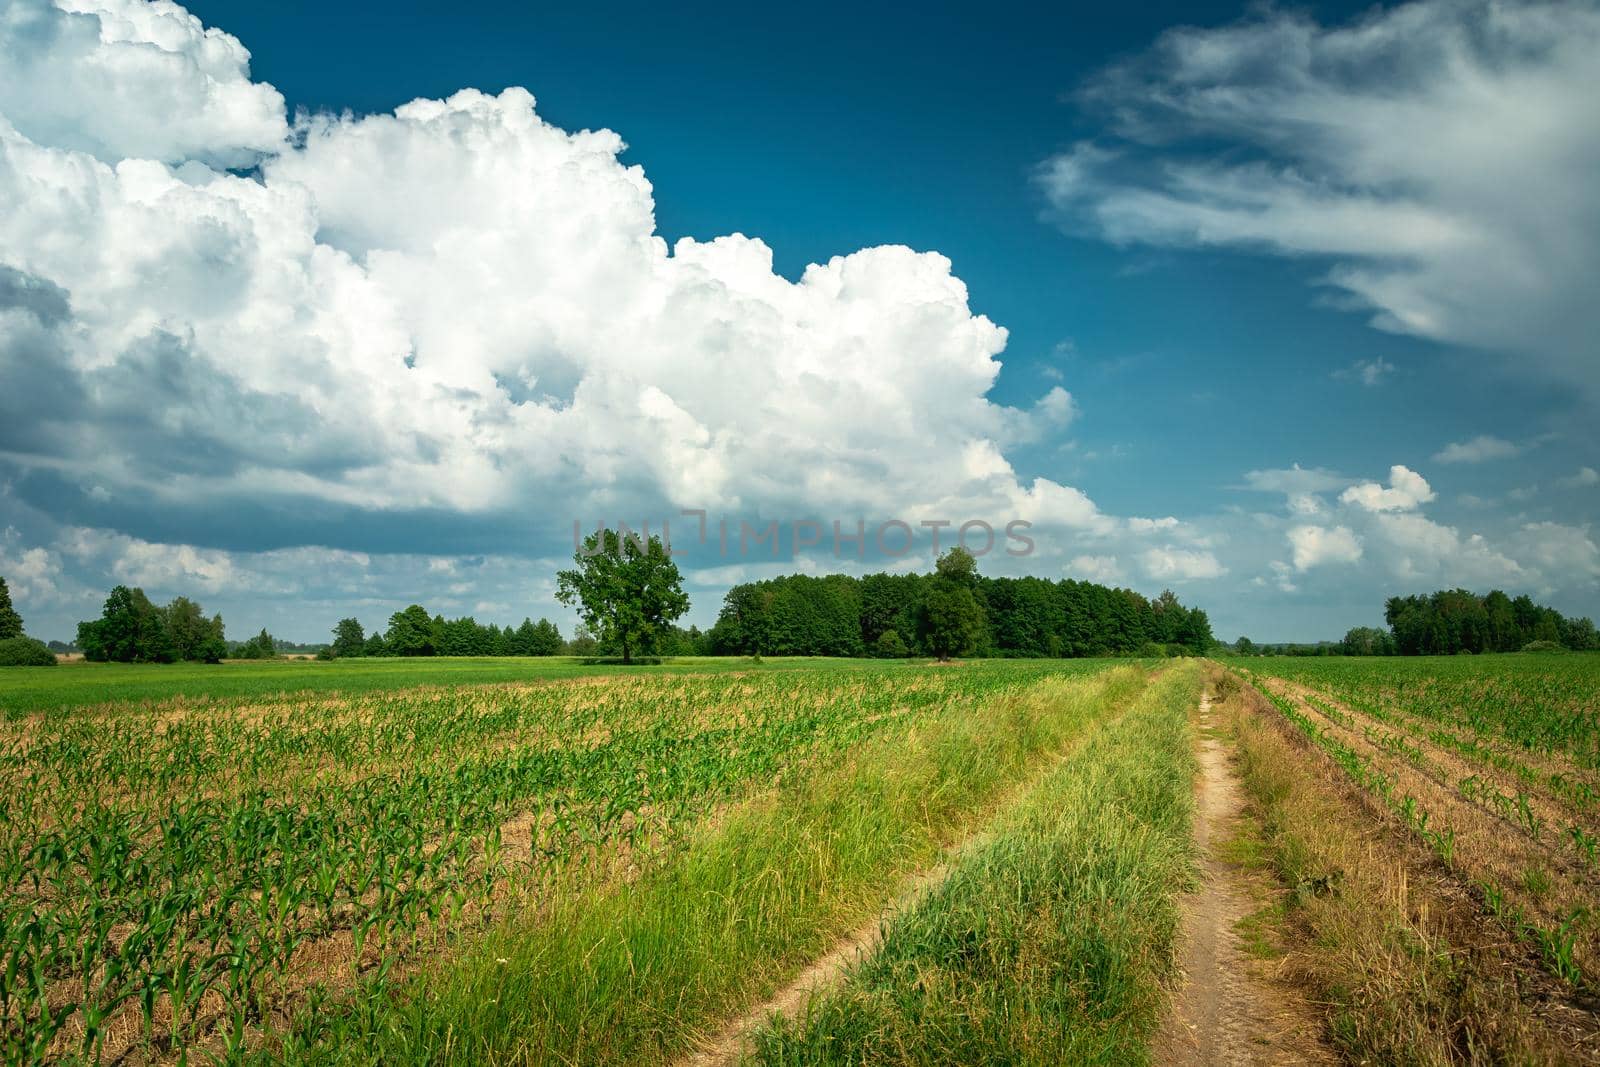 Dirt road through the fields and white cloud on the sky by darekb22